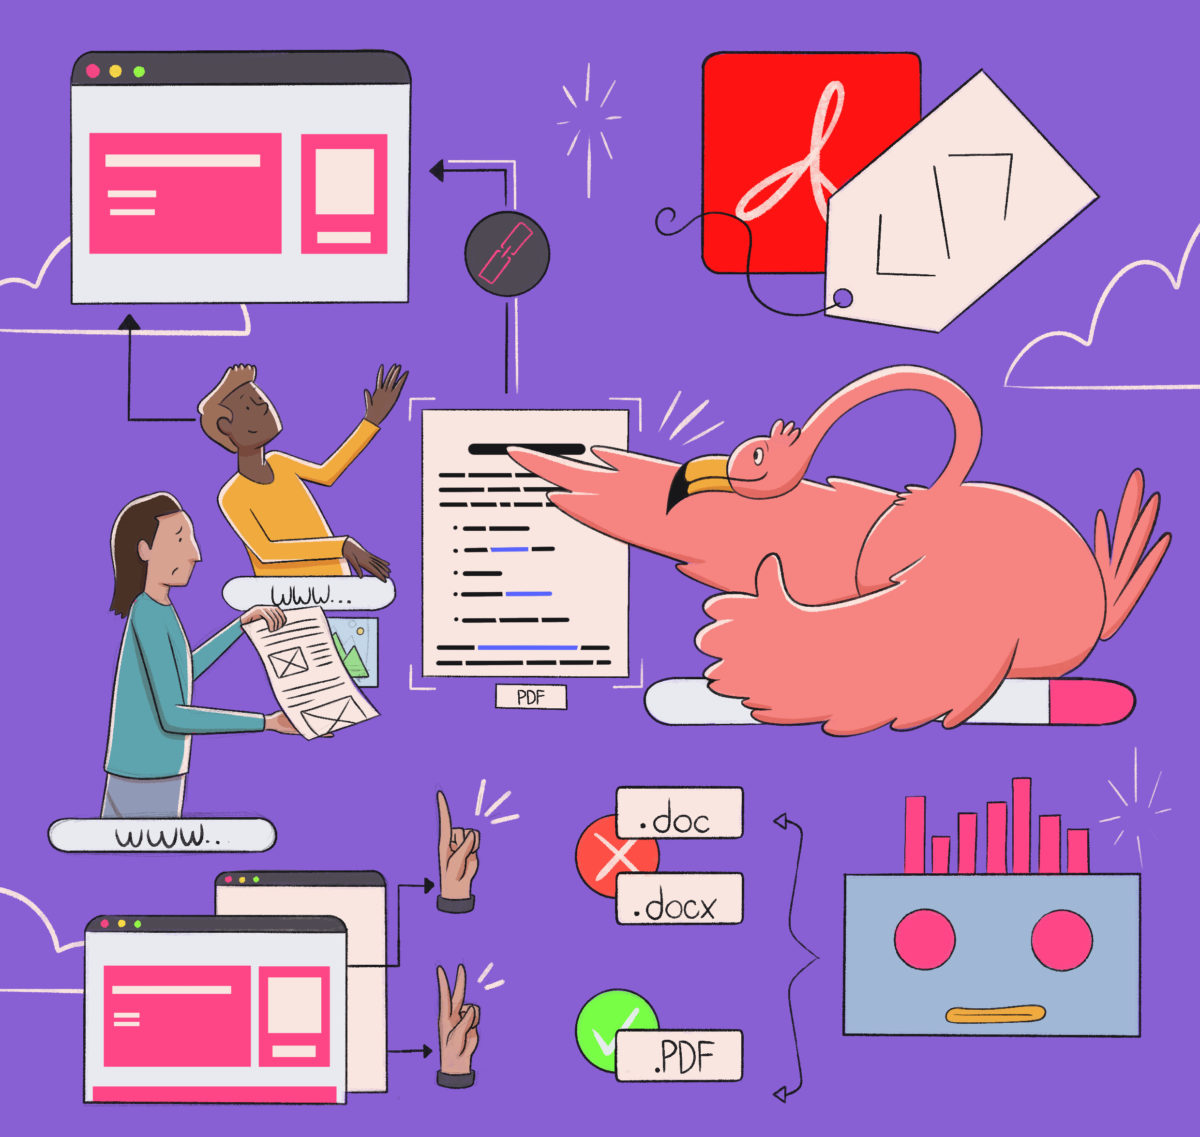 An illustration featuring people and a flamingo interacting with various document-related icons, highlighting different file formats and web design elements.